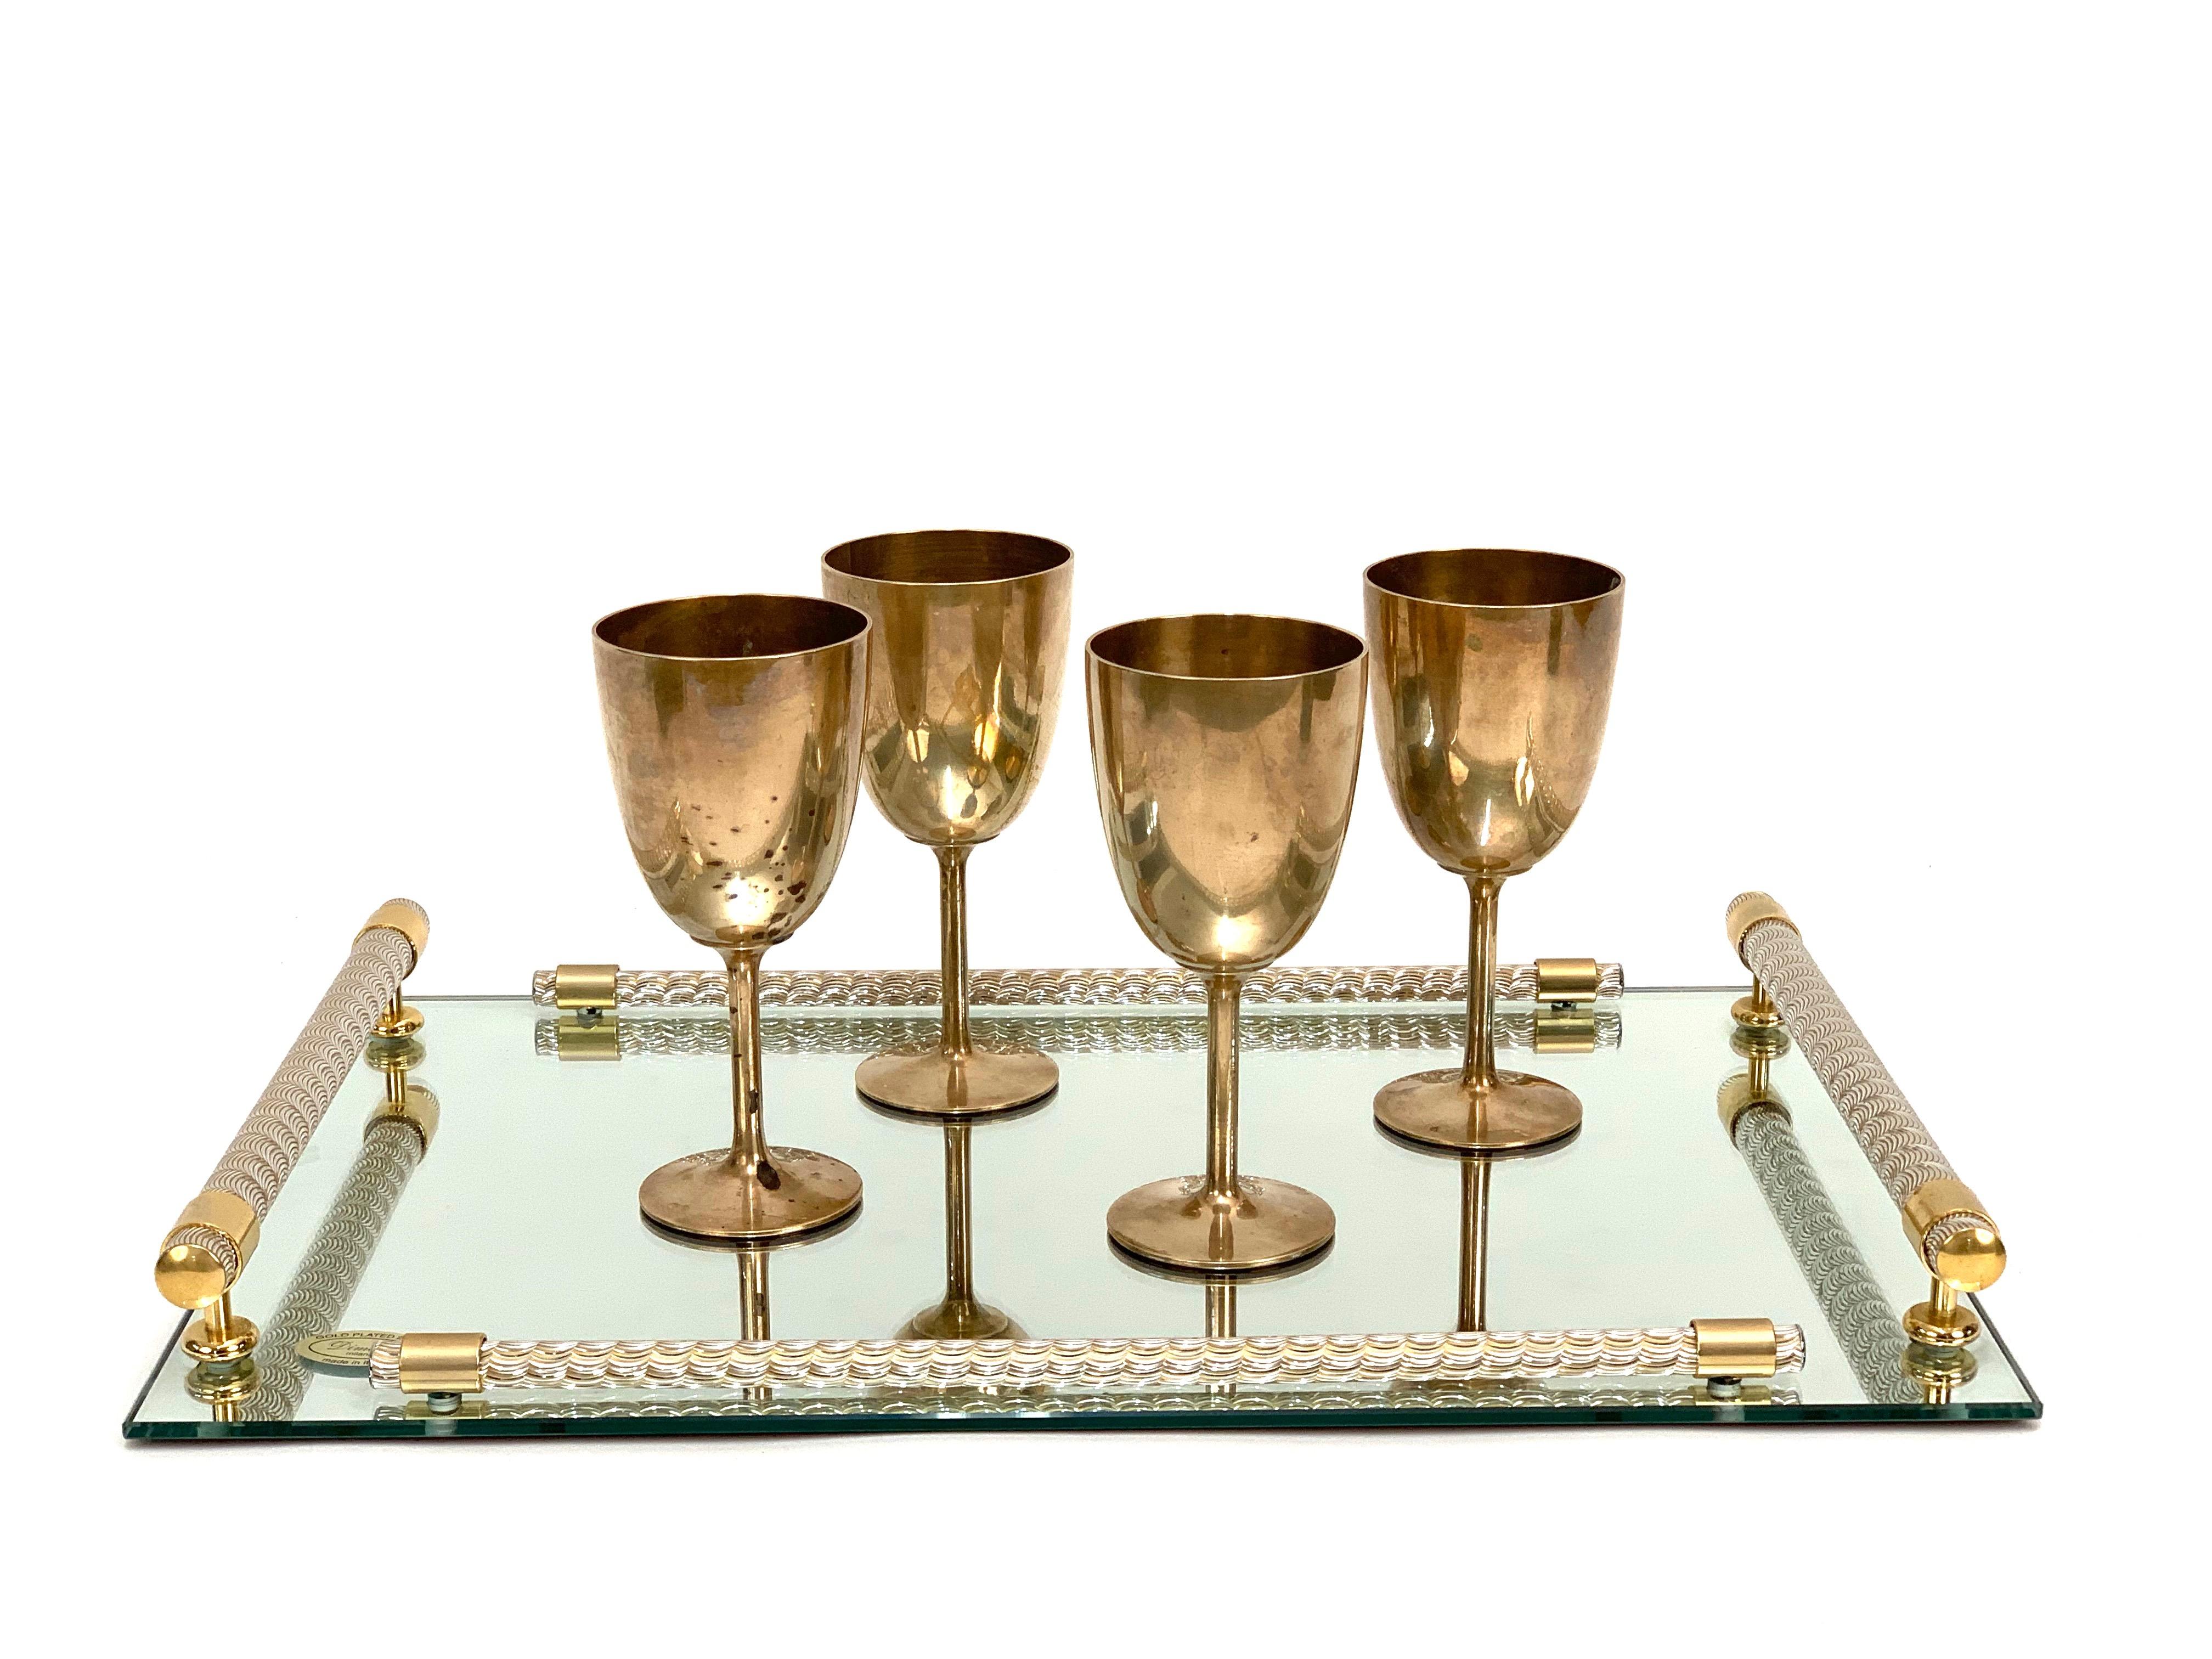 Midcentury Italian Regency Solid Brass Chalices, 1980s For Sale 4